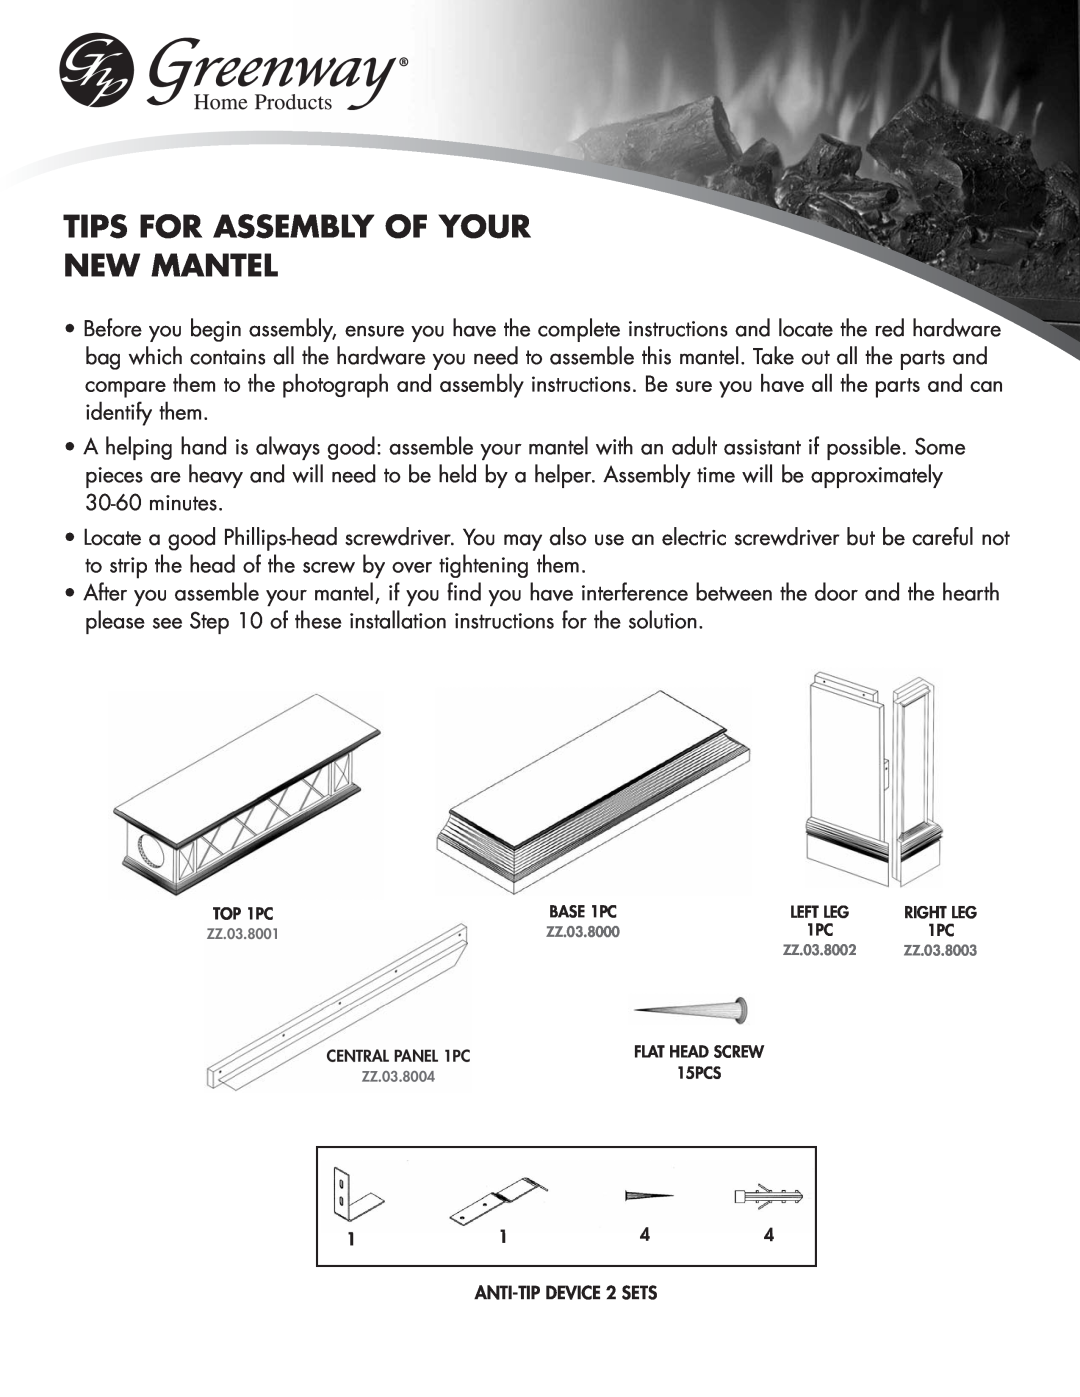 Greenway Home Products GEF282ABL manual Tips For Assembly Of Your New Mantel, ANTI-TIPDEVICE 2 SETS 